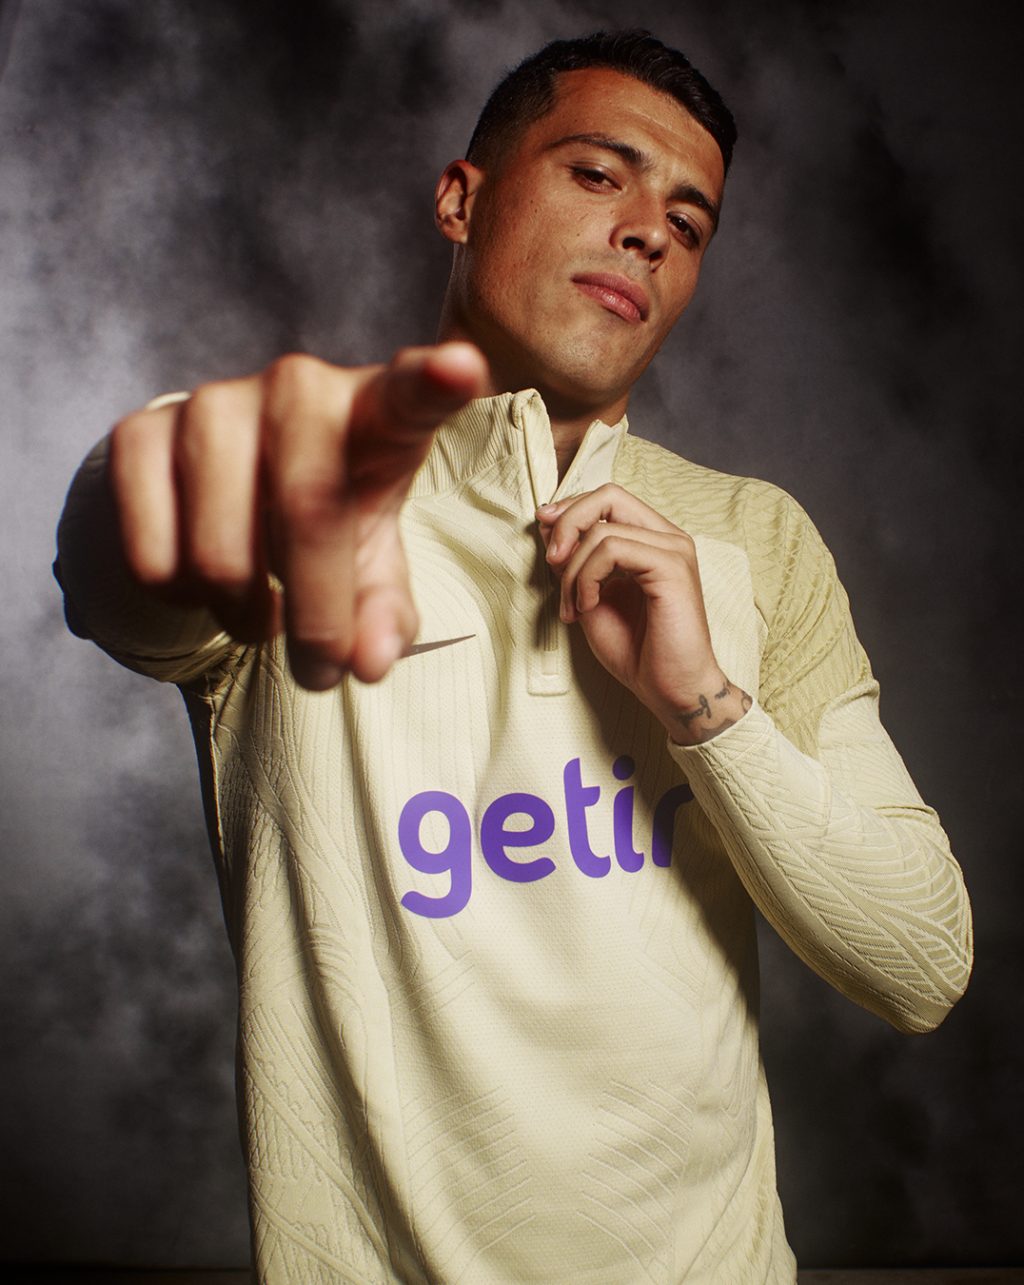 Porro wearing Tottenham Hotspurs training kit and pointing at the camera on a black and white studio background